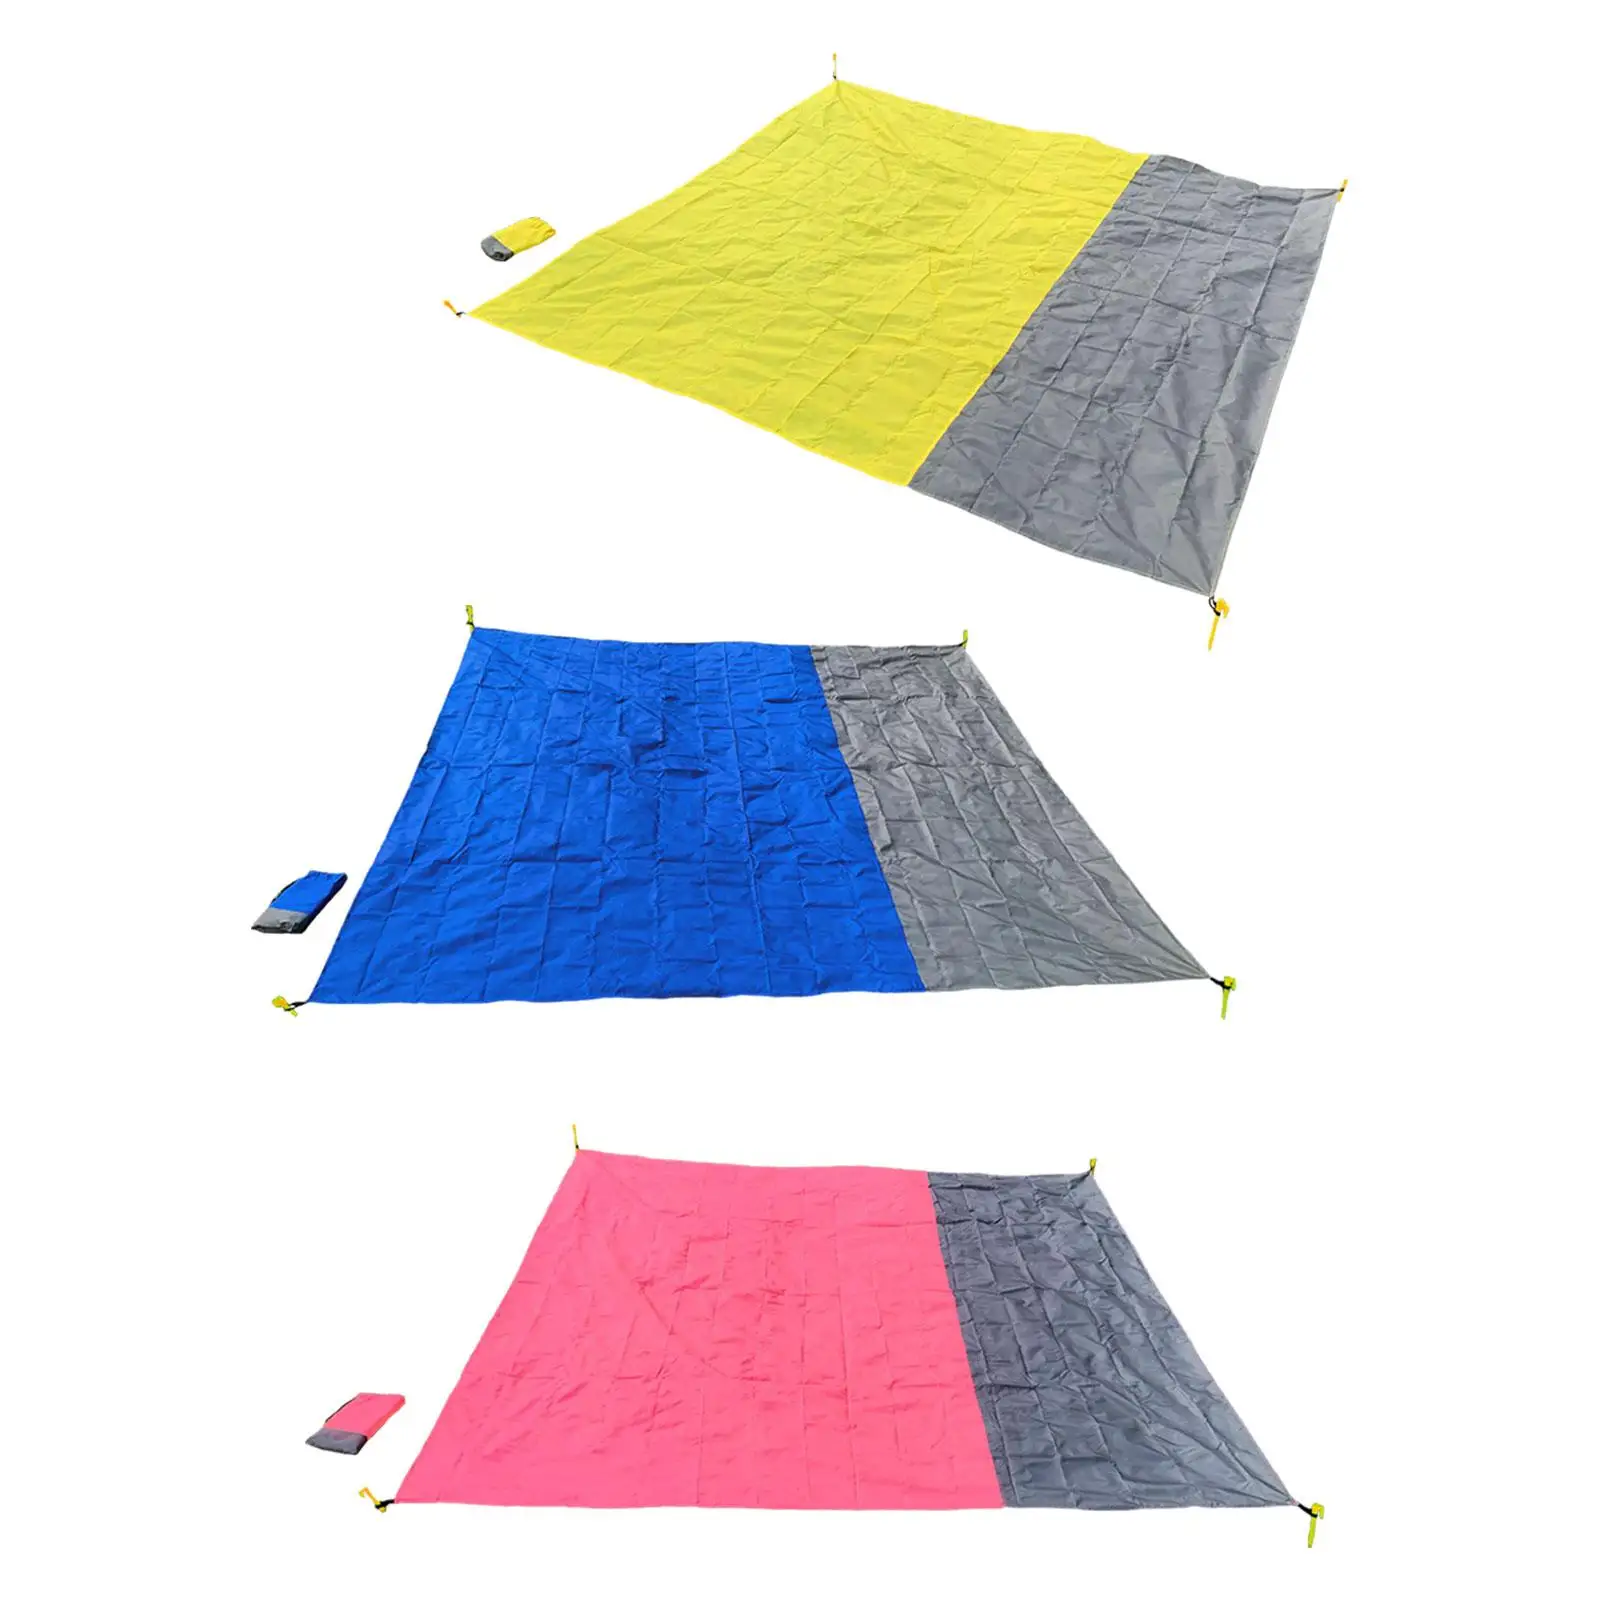 Picnic Blanket Foldable Compact Camping Blanket for Park Sports